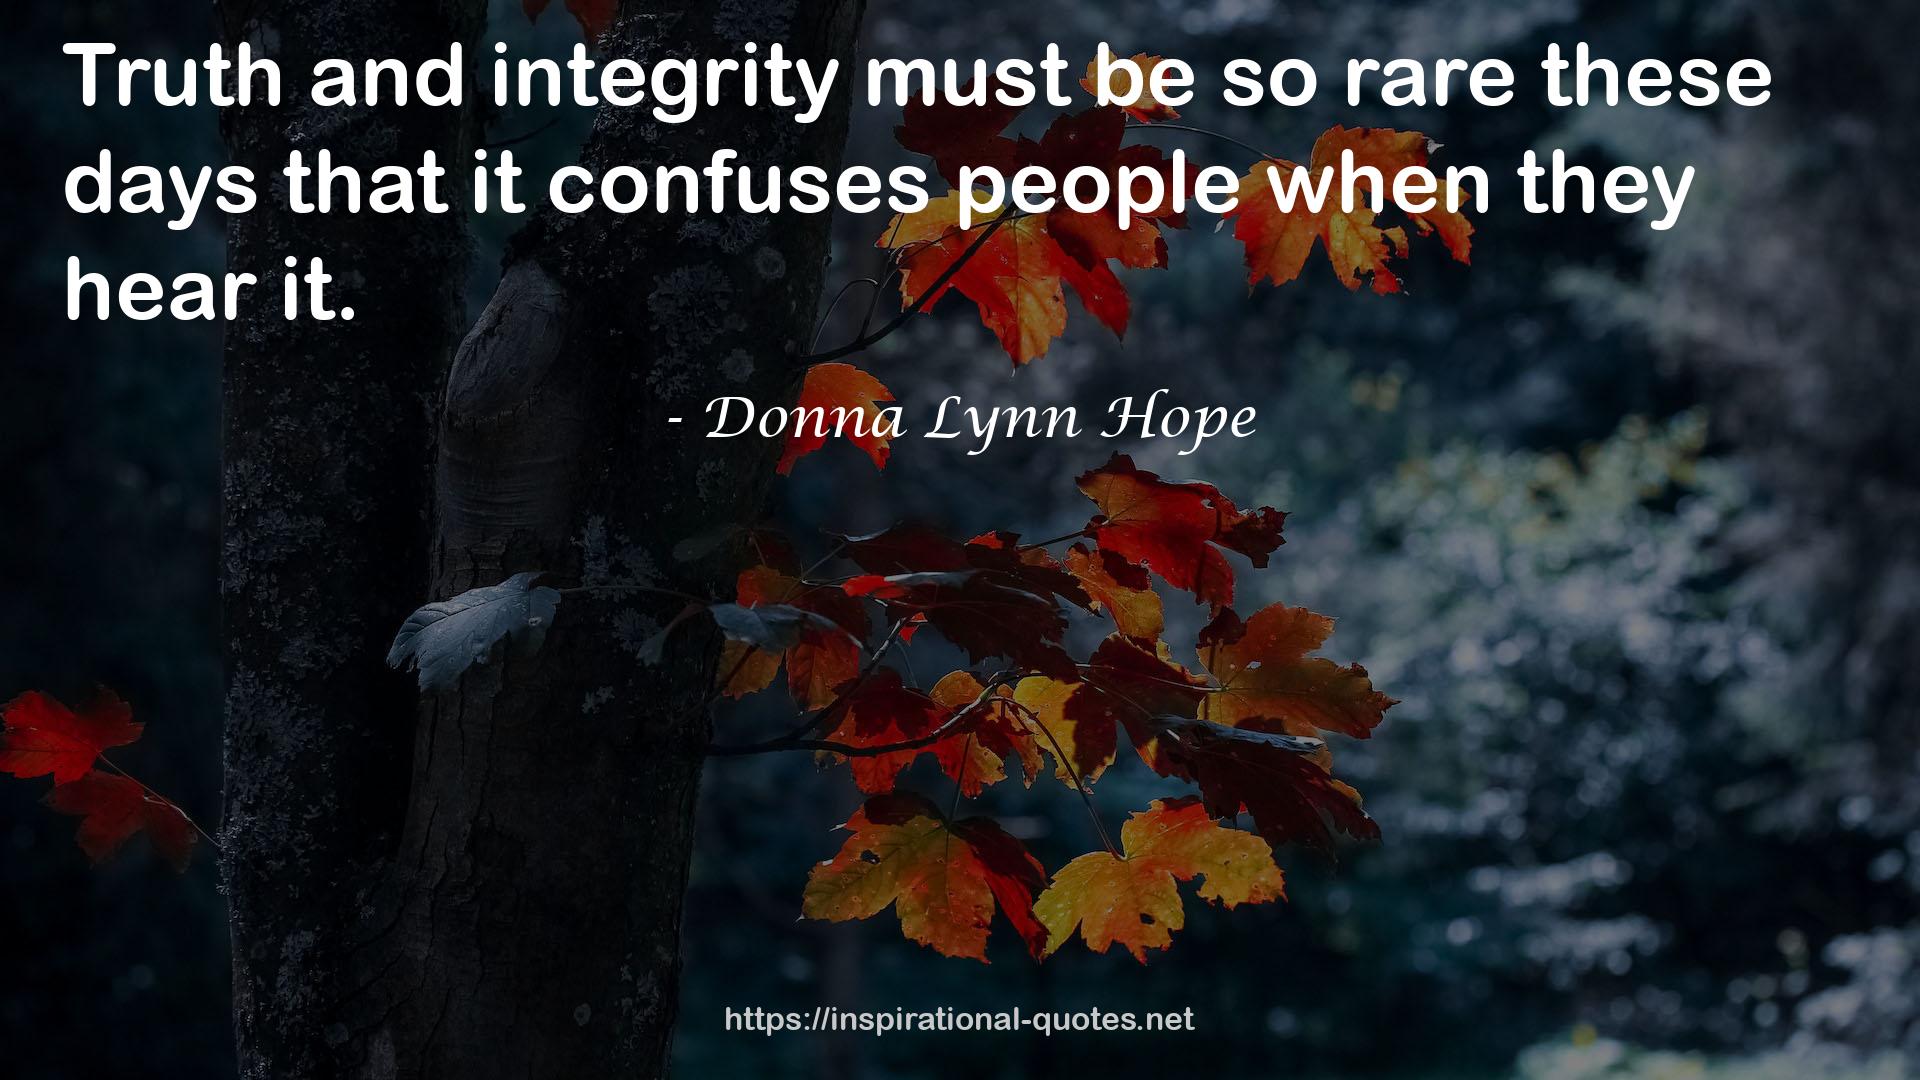 Donna Lynn Hope QUOTES